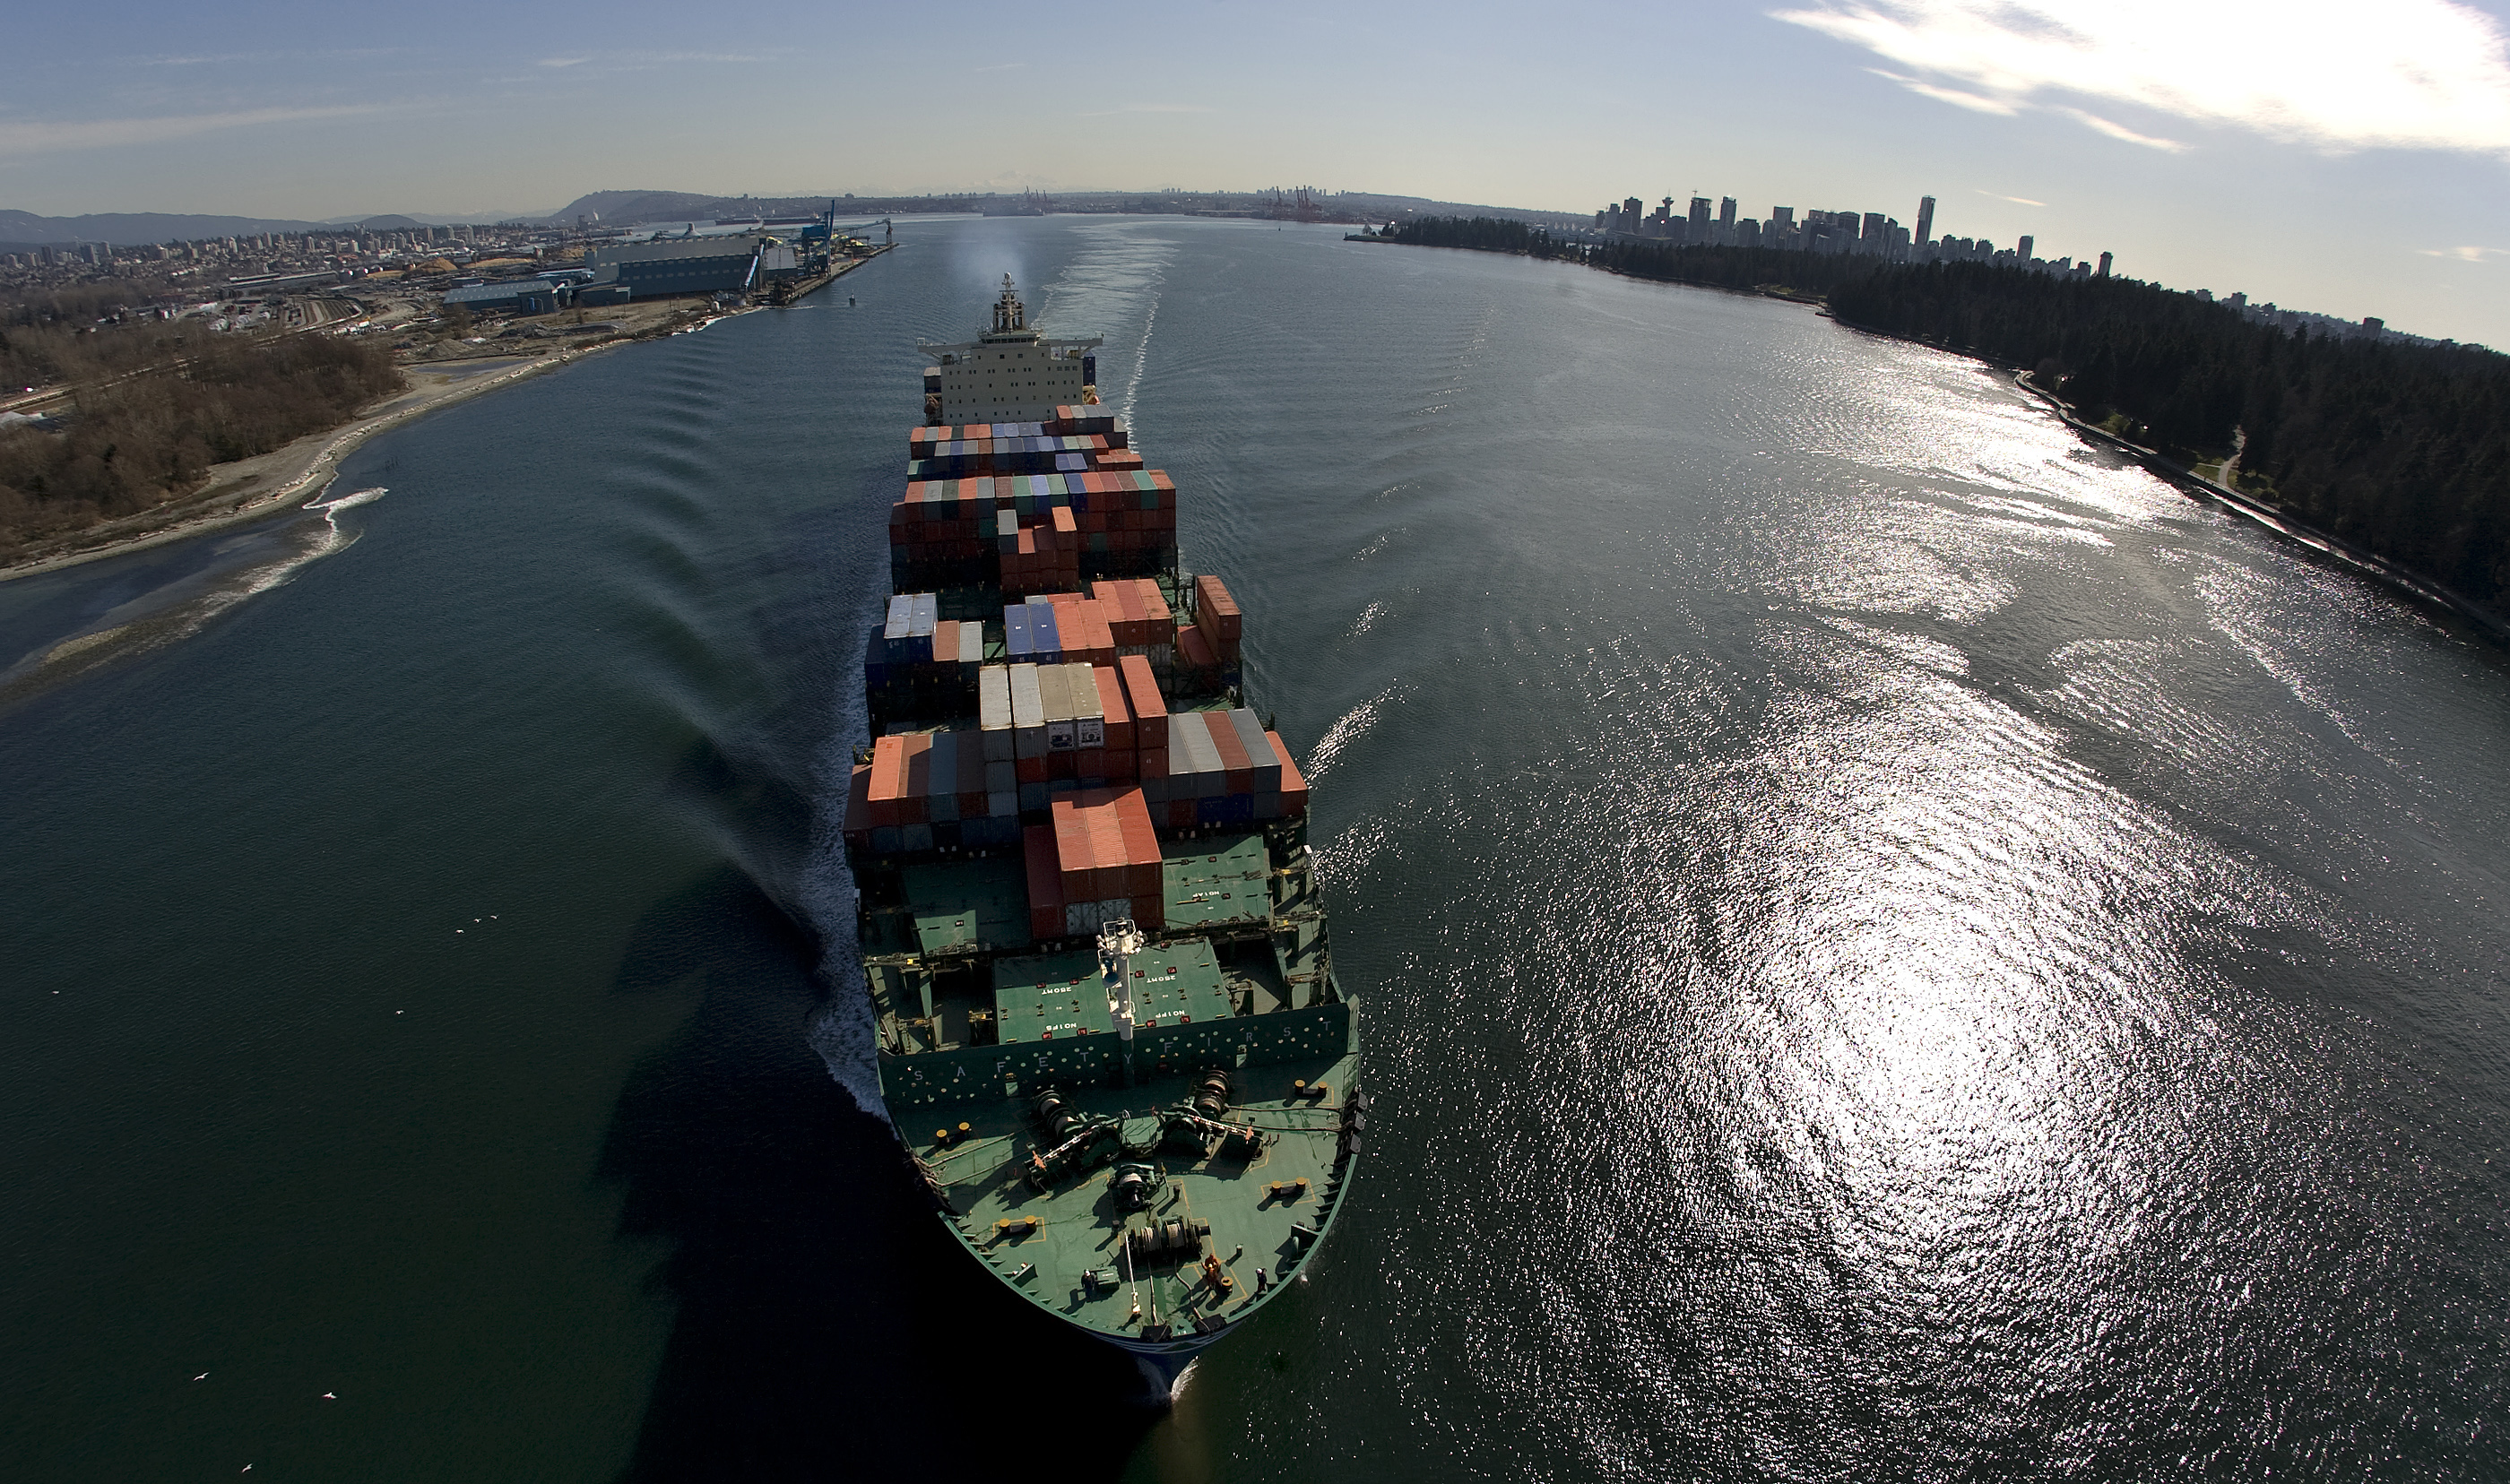 Black carbon: The 'low-hanging fruit' for cleaner shipping